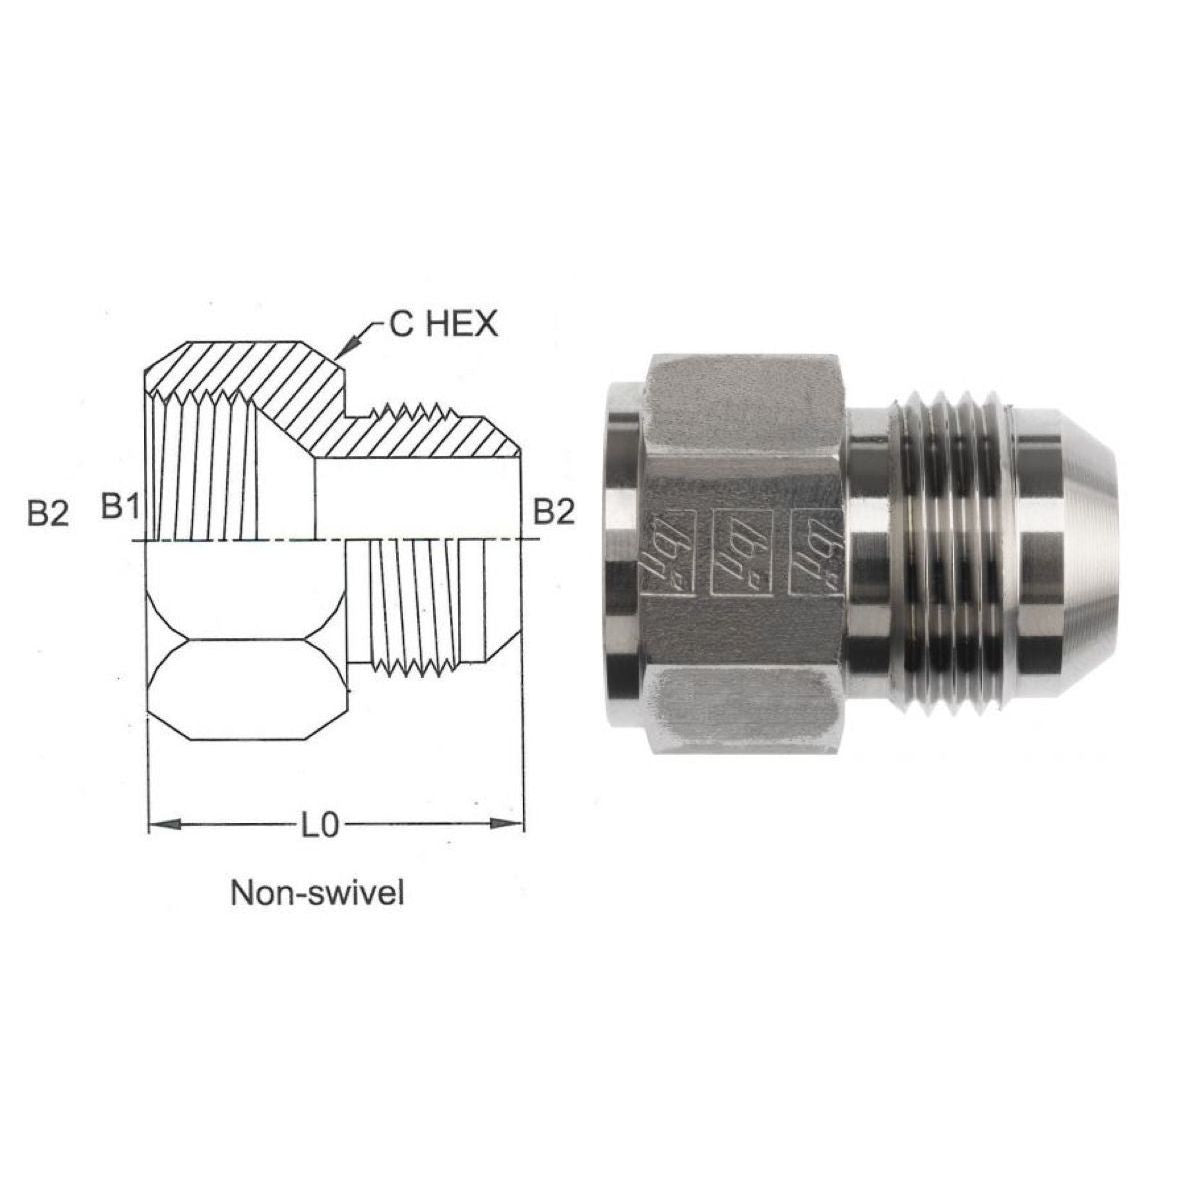 2406-10-06-SS : OneHydraulics  Straight Reducer, Non-Swivel, Straight, 0.625 (5/8") Female JIC x 0.375 (3/8") Male, Stainless Steel